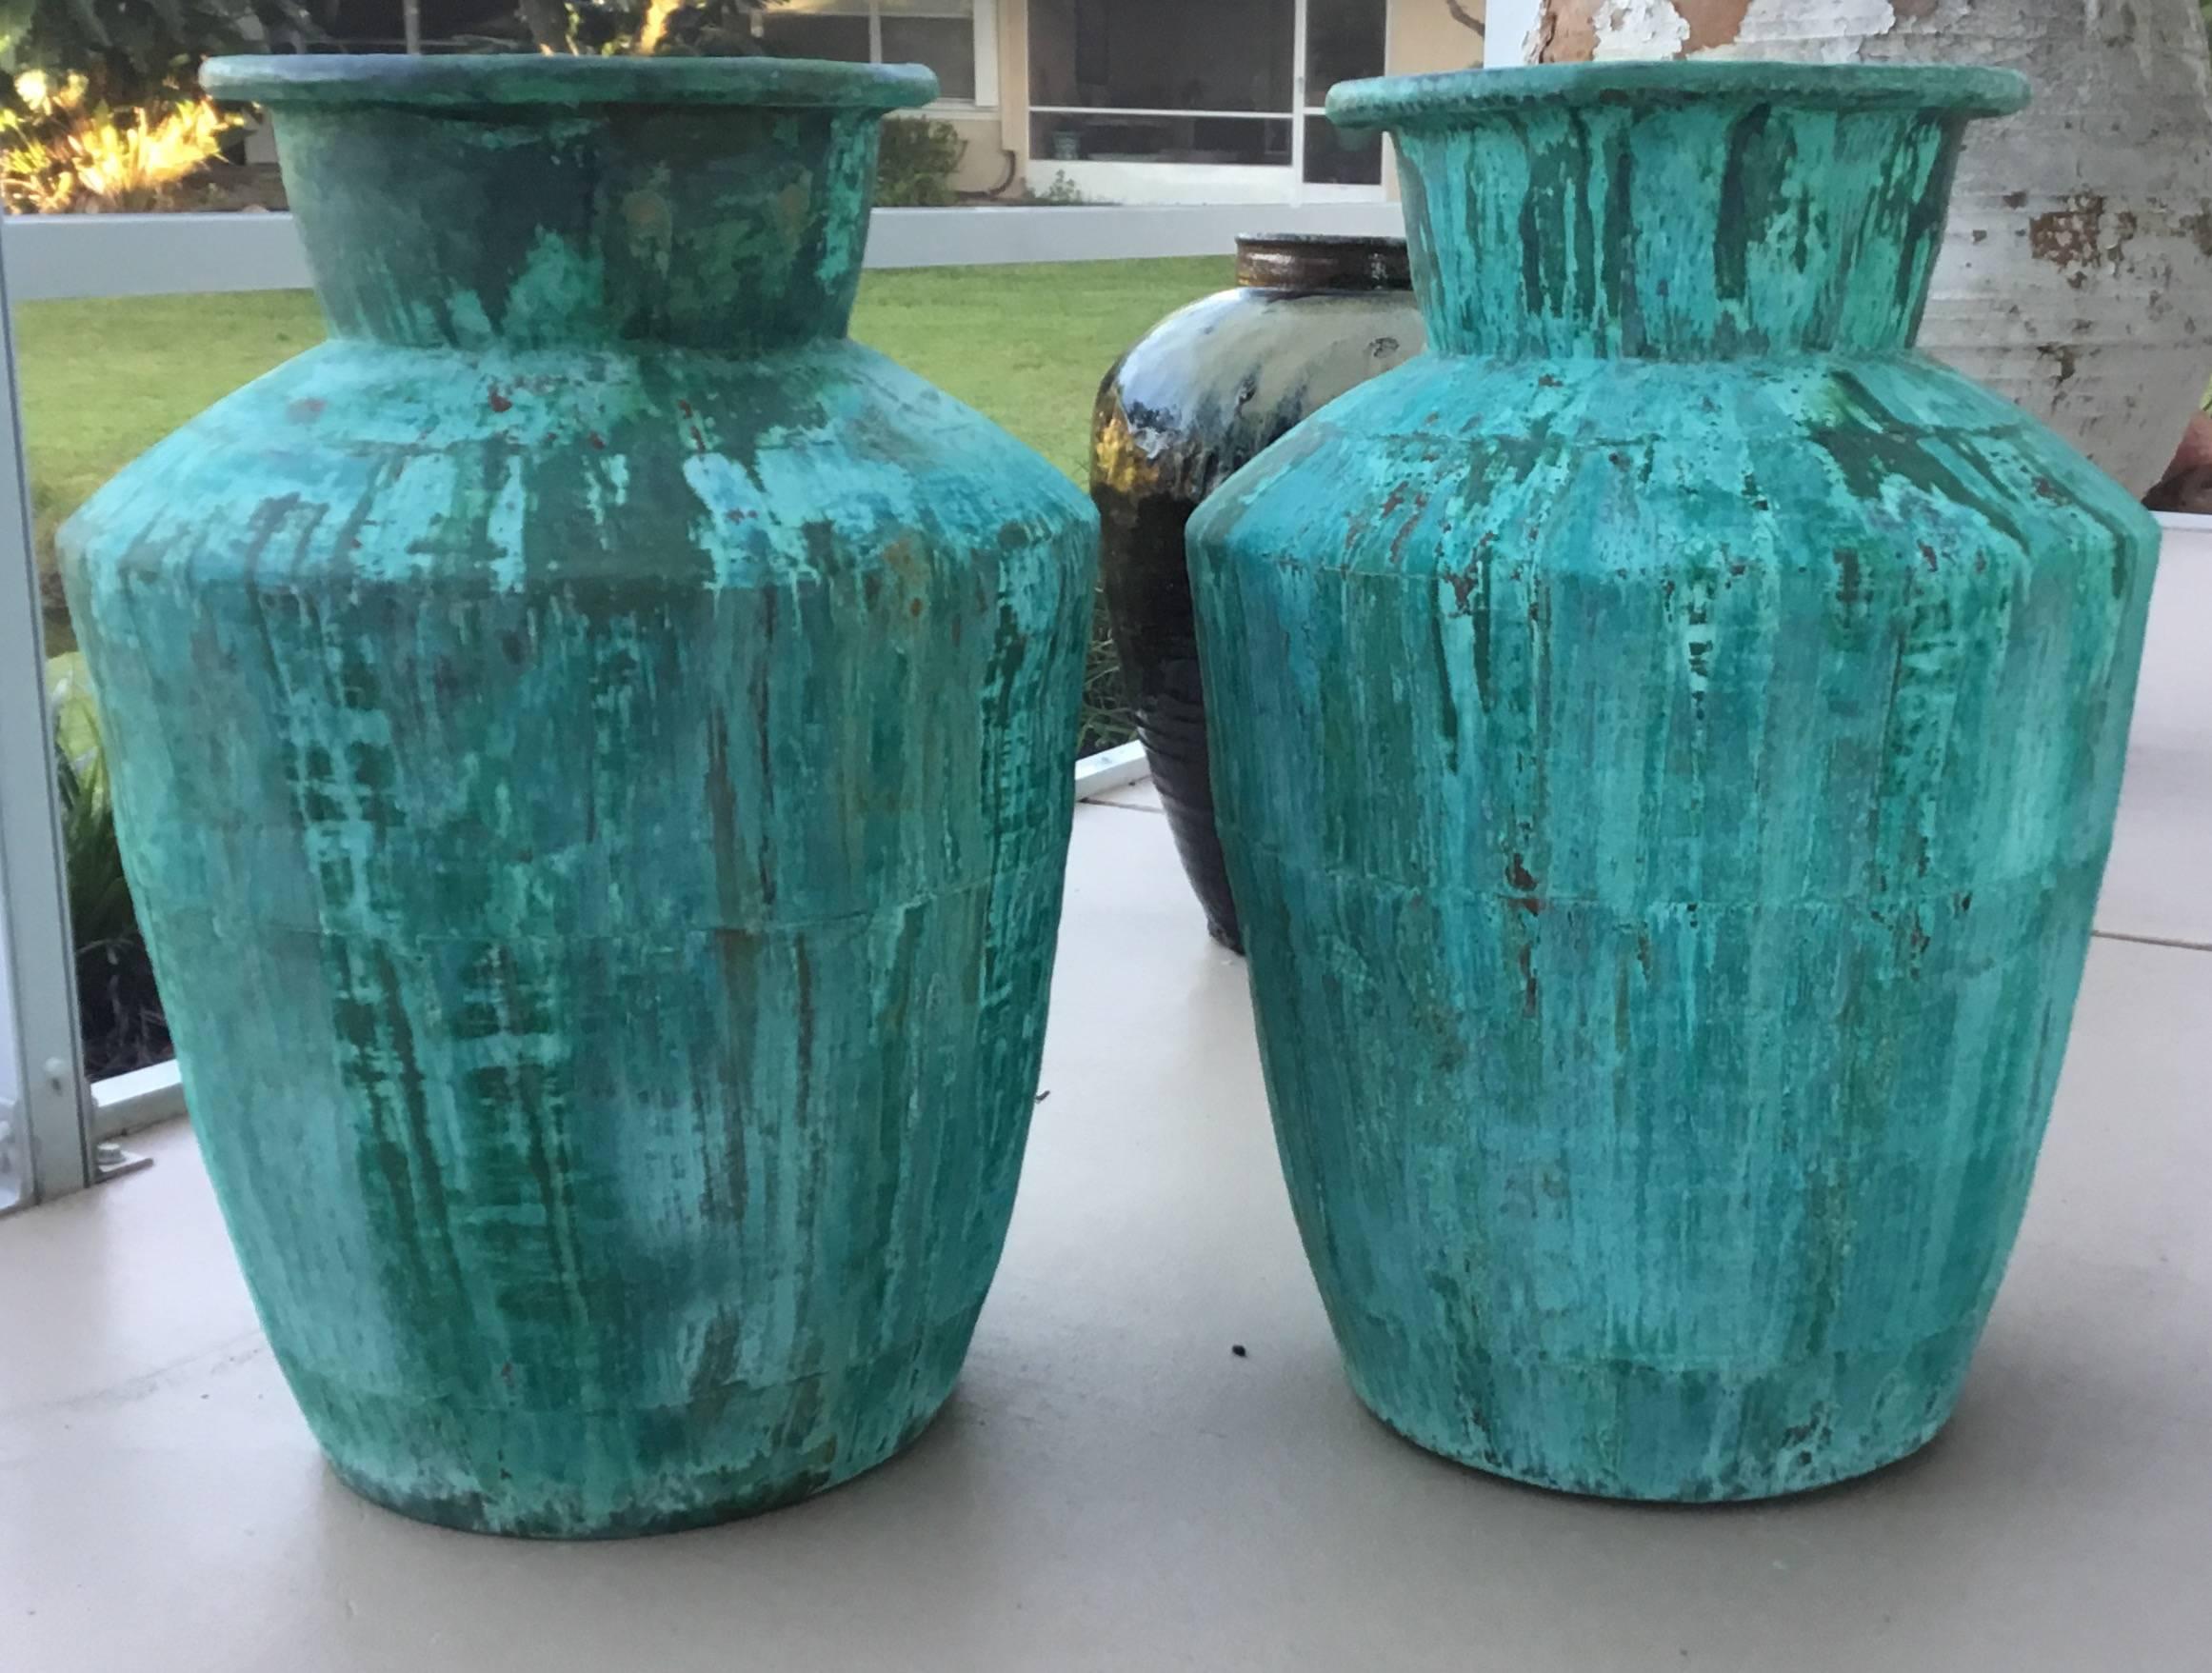 Pair of one of a kind large copper planter/vases, with beautiful oxidizes patina.
Great as a decorative planter indoor or outdoors.
Originally was used for moonshine container in North Carolina in the 1940s.
Size: 29